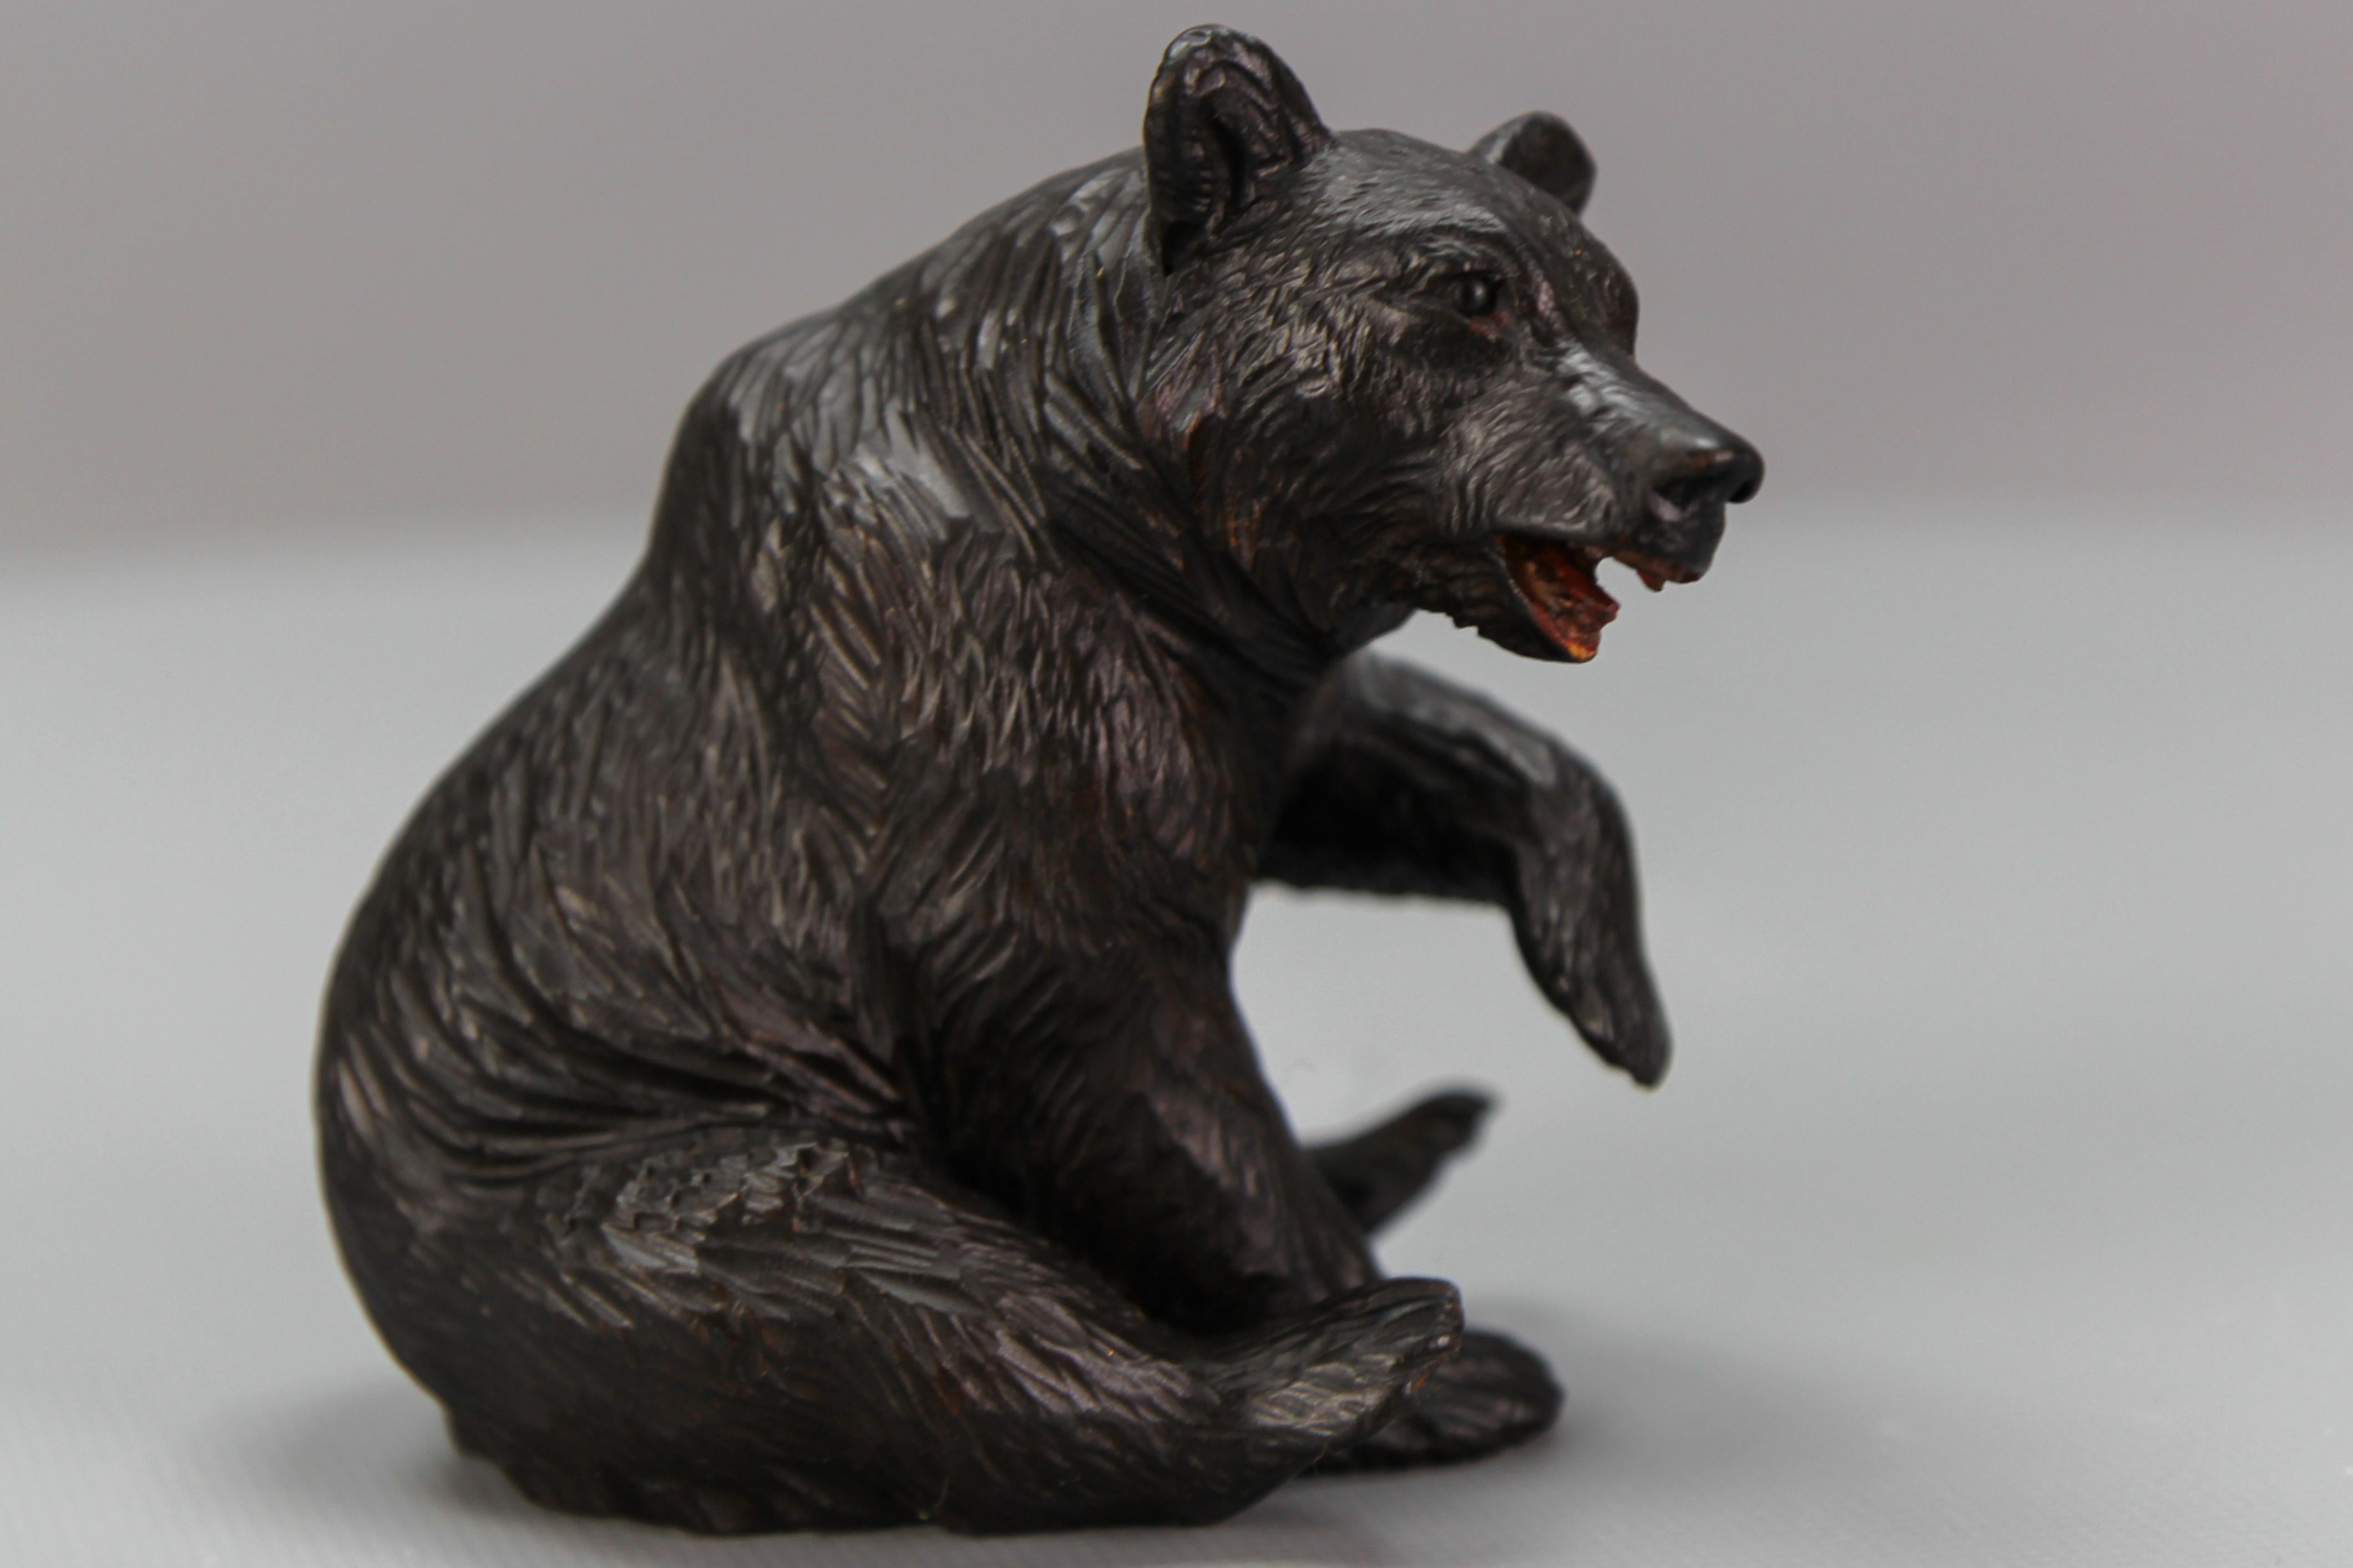 Antique black forest carved seated bear sculpture
An adorable and masterfully hand-carved figure of a seated bear. Switzerland, circa 1900.
Dimensions, approx.: height: 11.5 cm / 4.52 in; width: 8 cm / 3.15 in; depth: 11 cm / 4.33 in.
In good